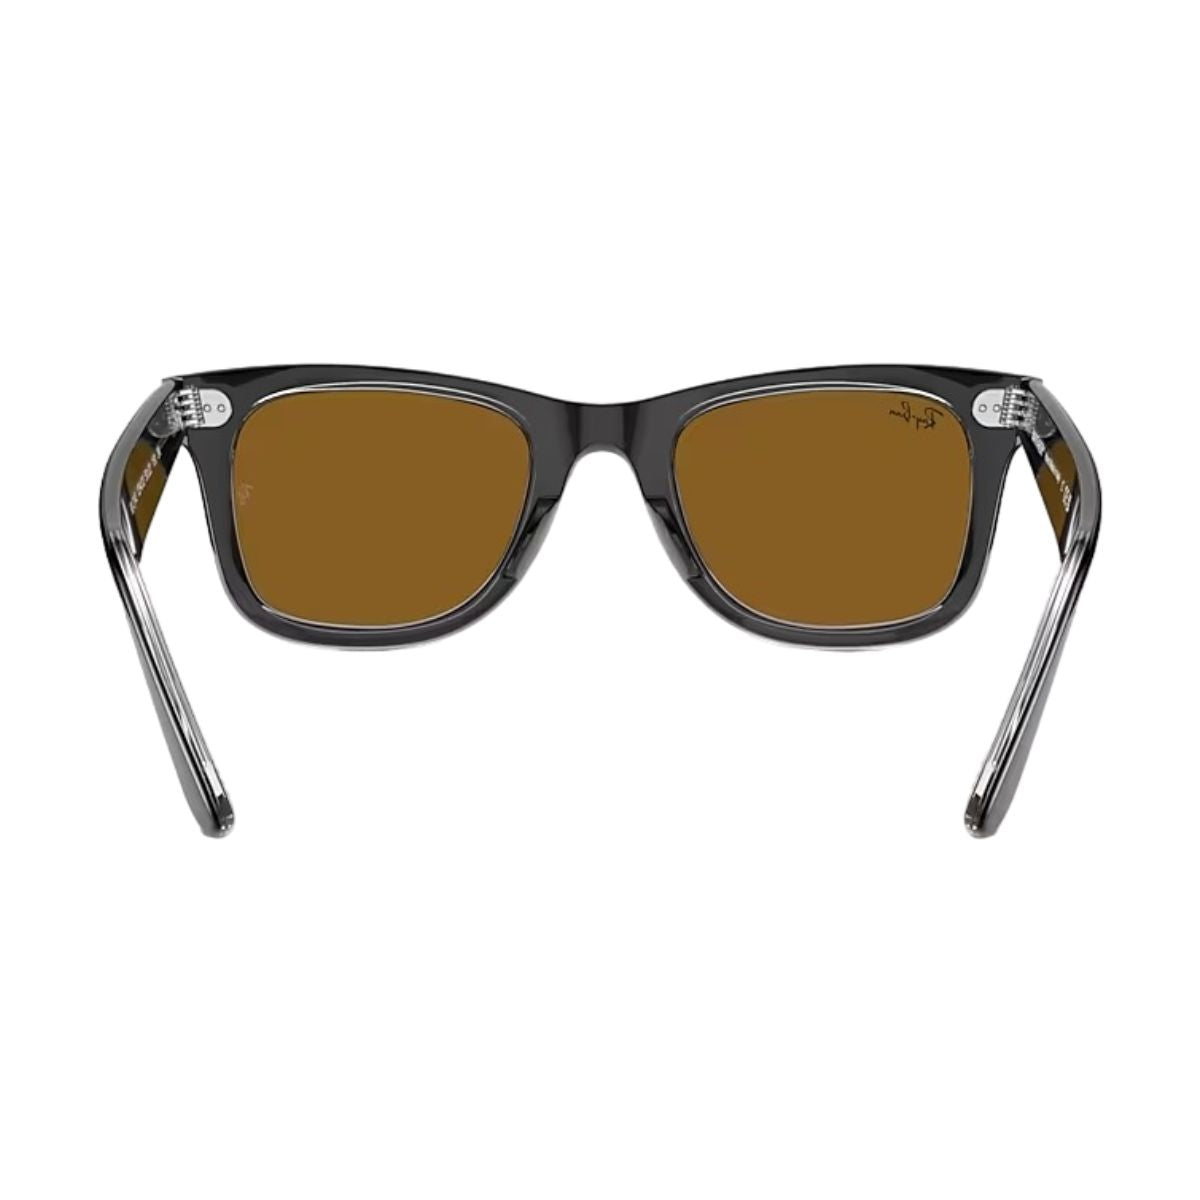 "Buy Online Ray Ban 2140 1294/33 Trendy Sunglass For Men And Women At Optorium" 